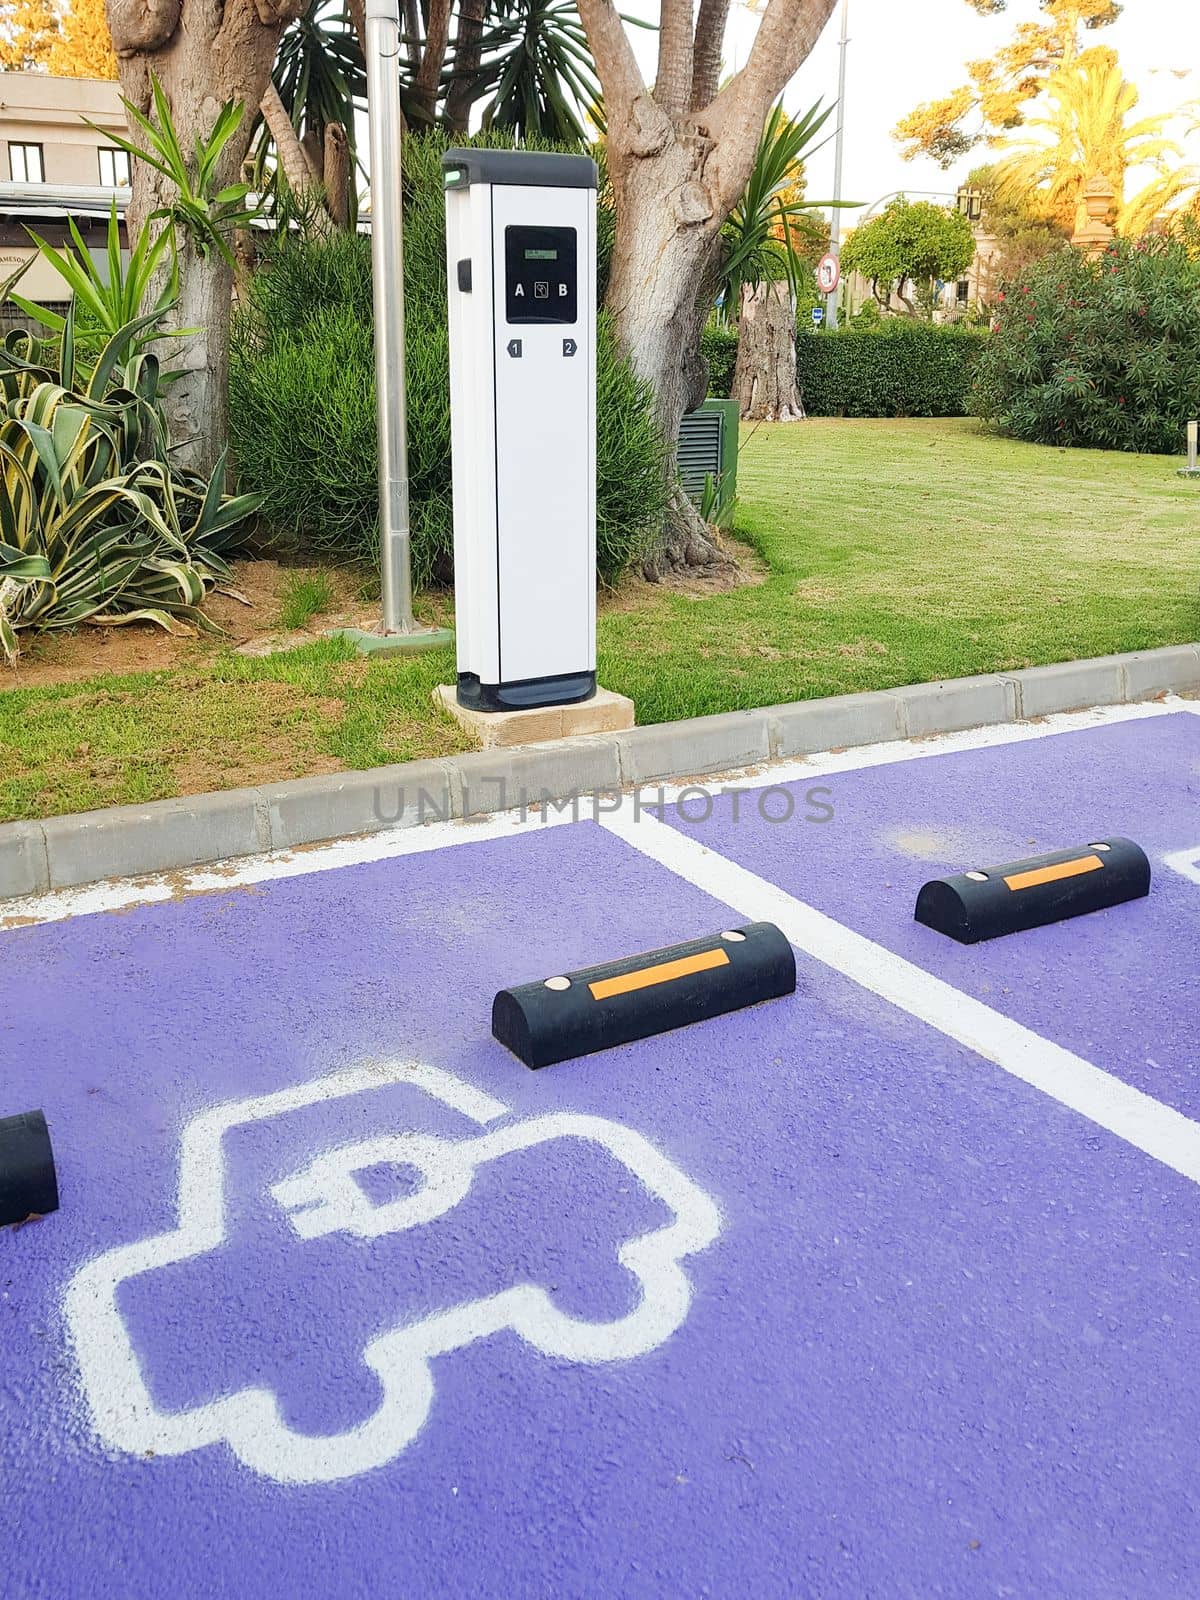 Charging point for electric vehicles located on the street.